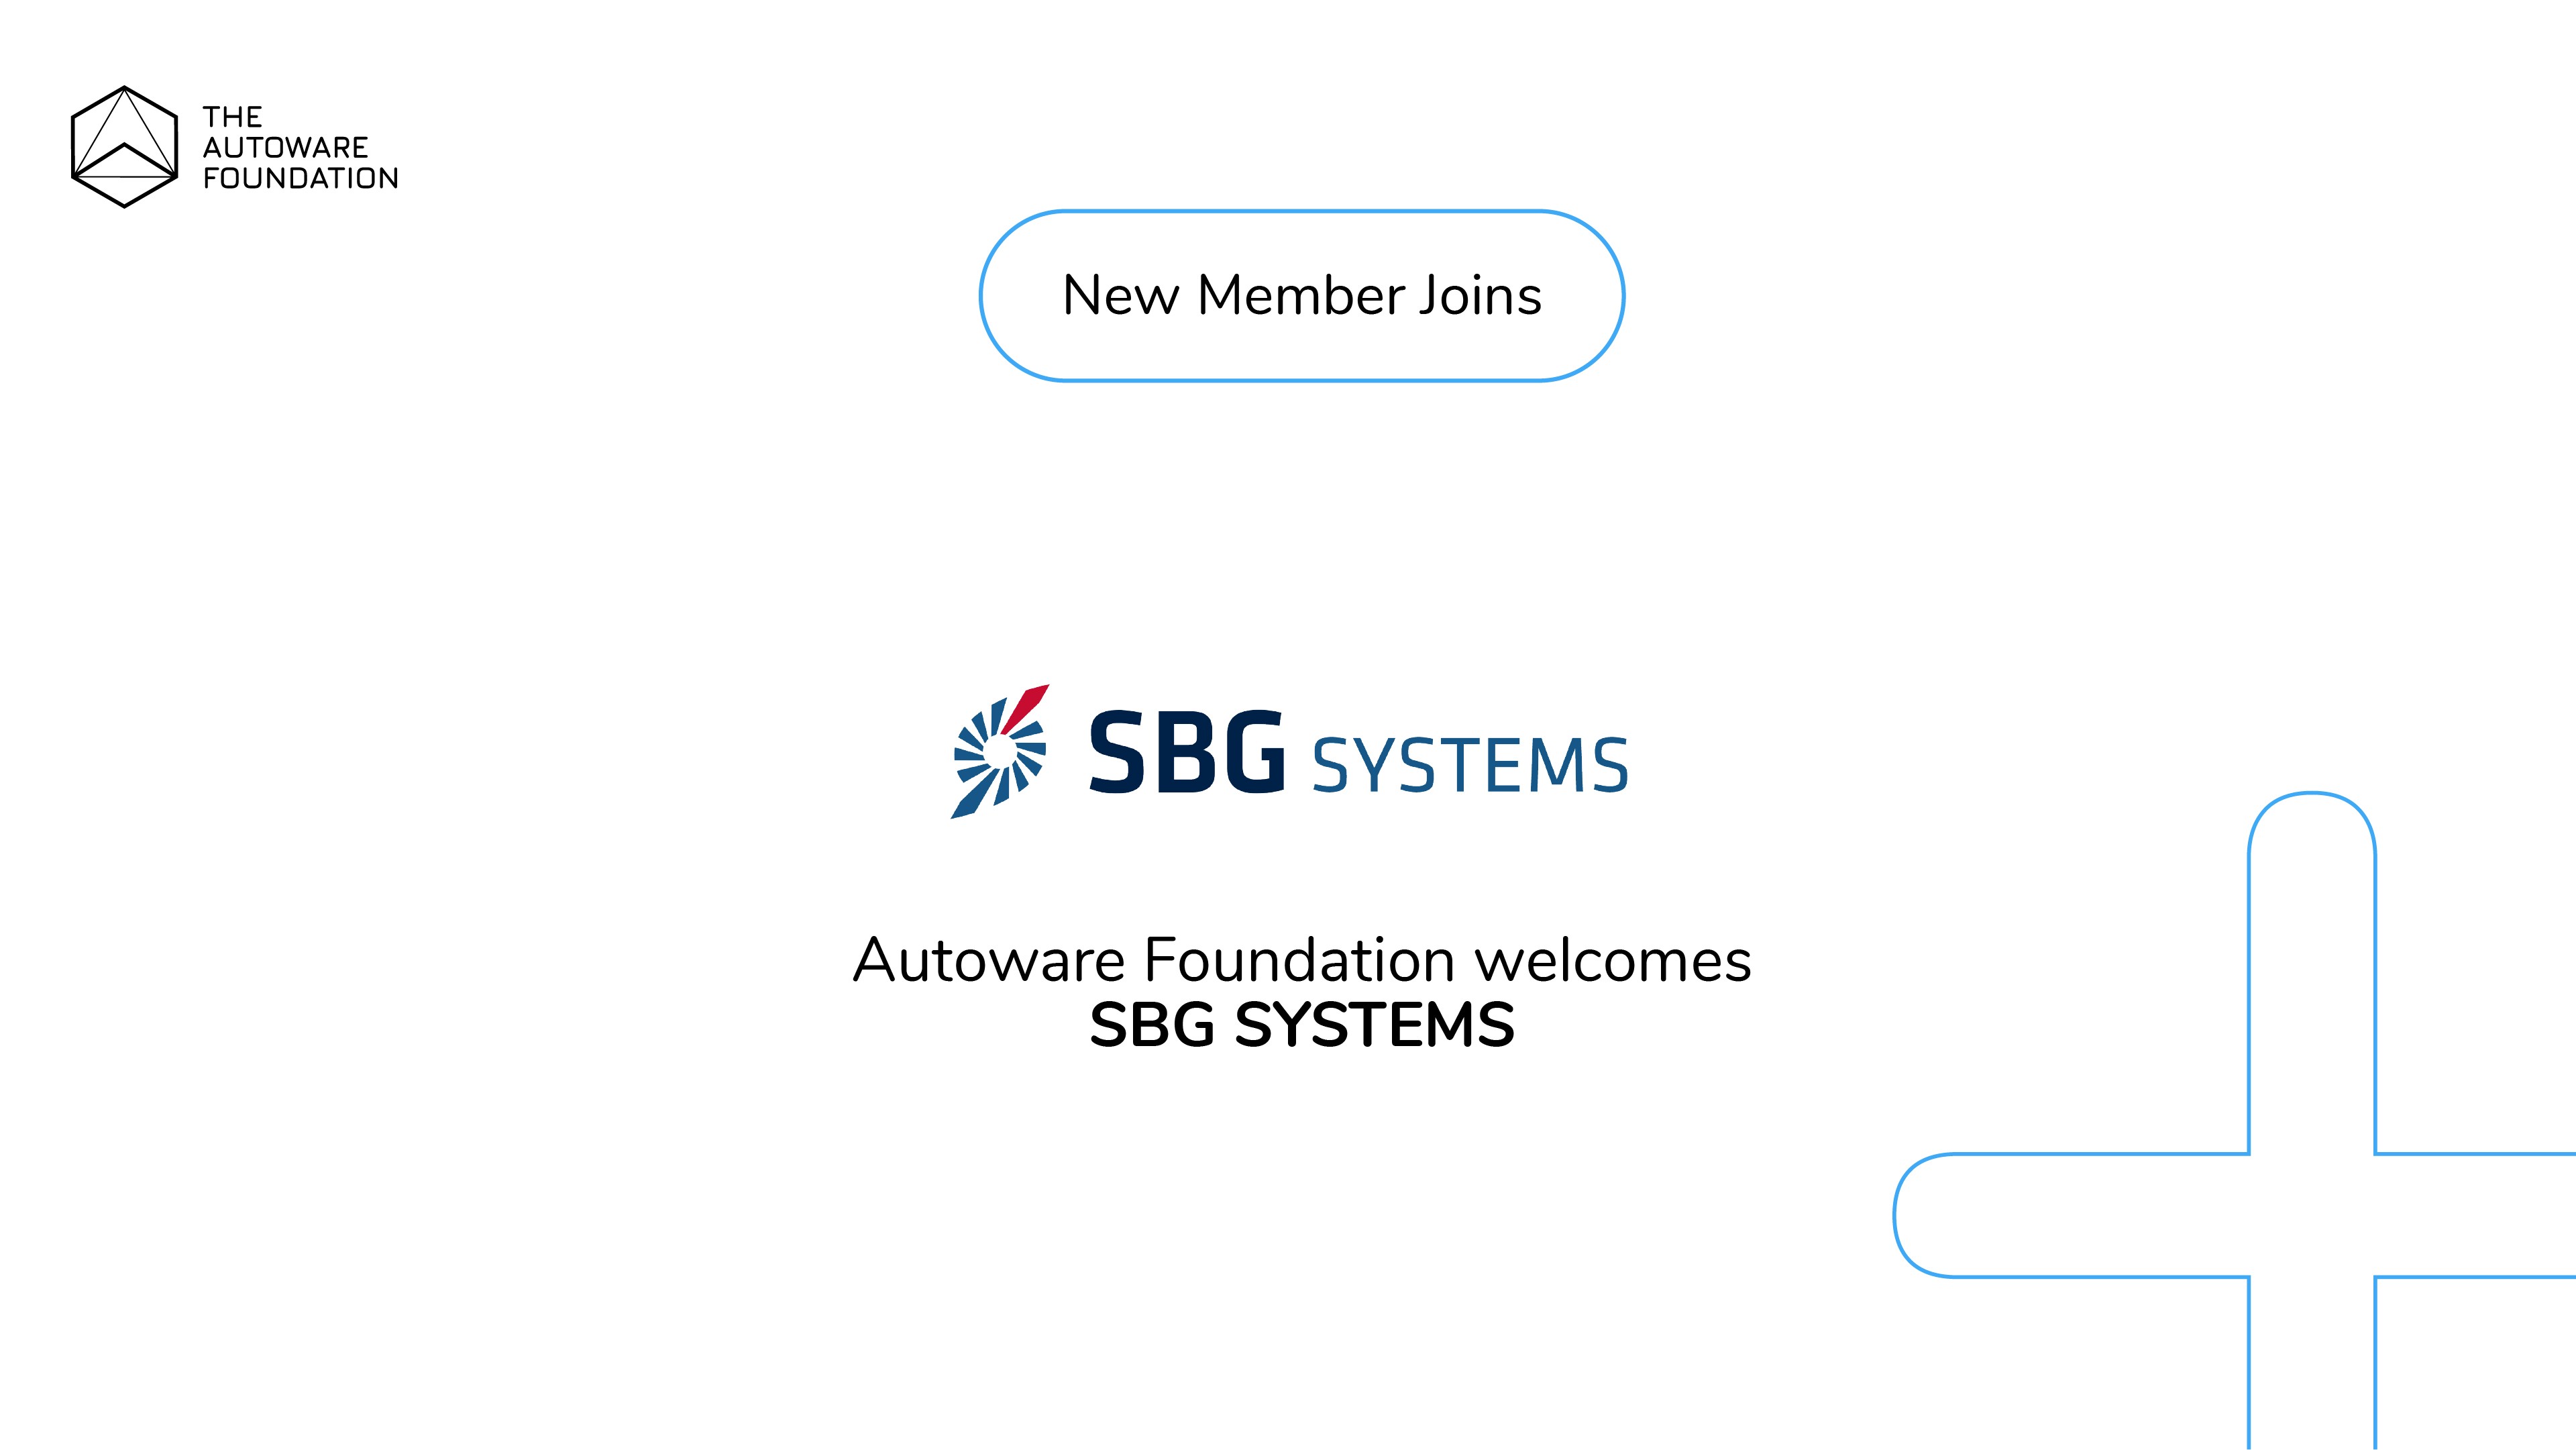 SBG Systems joins the Autoware Foundation